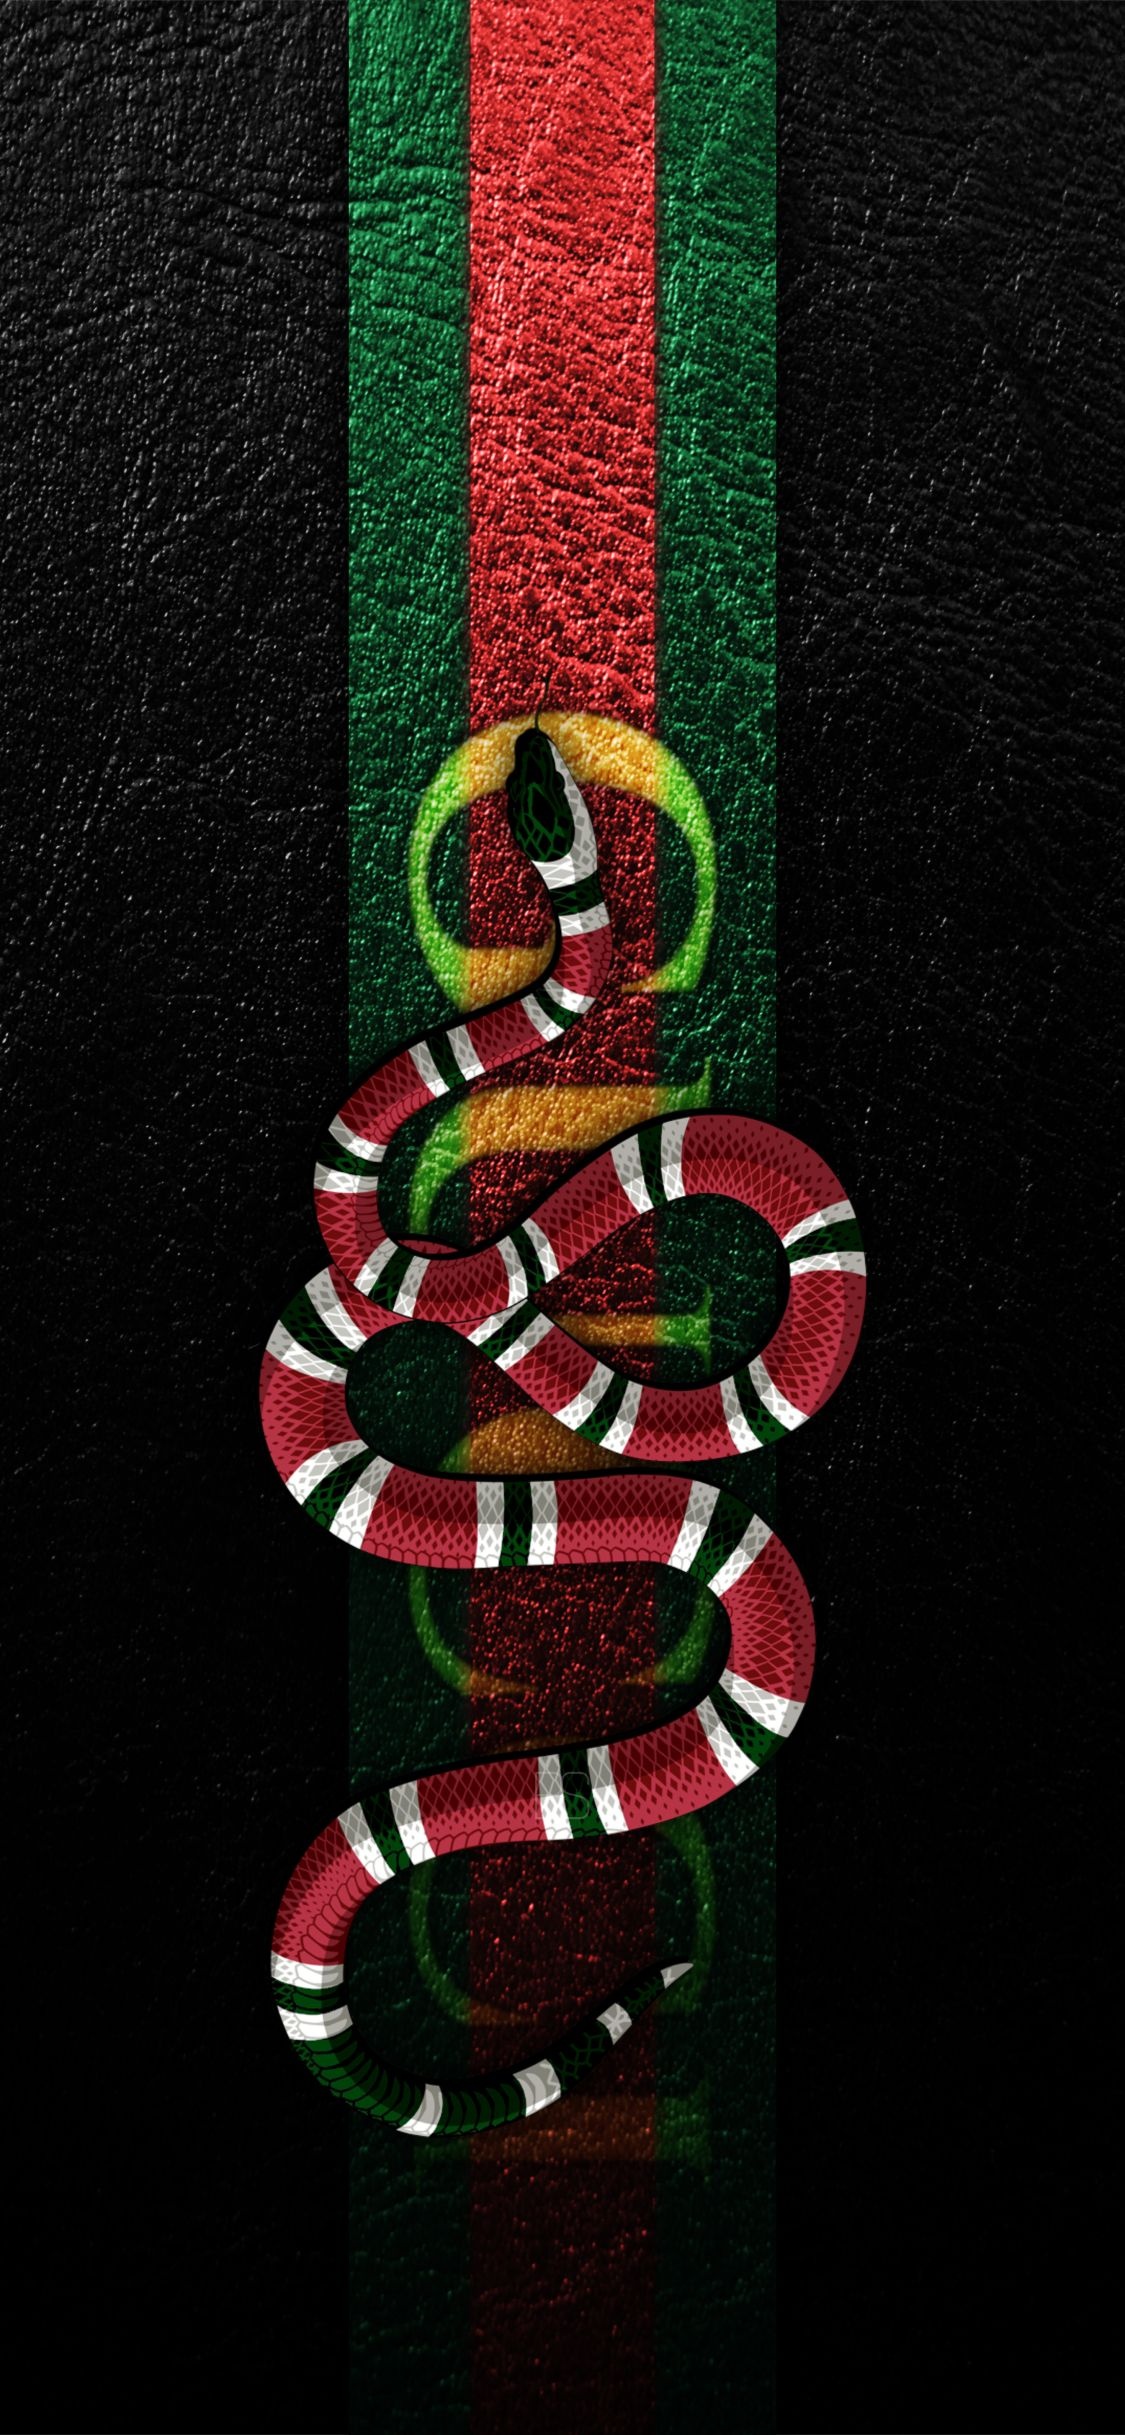 Gucci: The kingsnake, Symbolizing wisdom and power, One of the signature details of Alessandro Michele's collections. 1130x2440 HD Background.